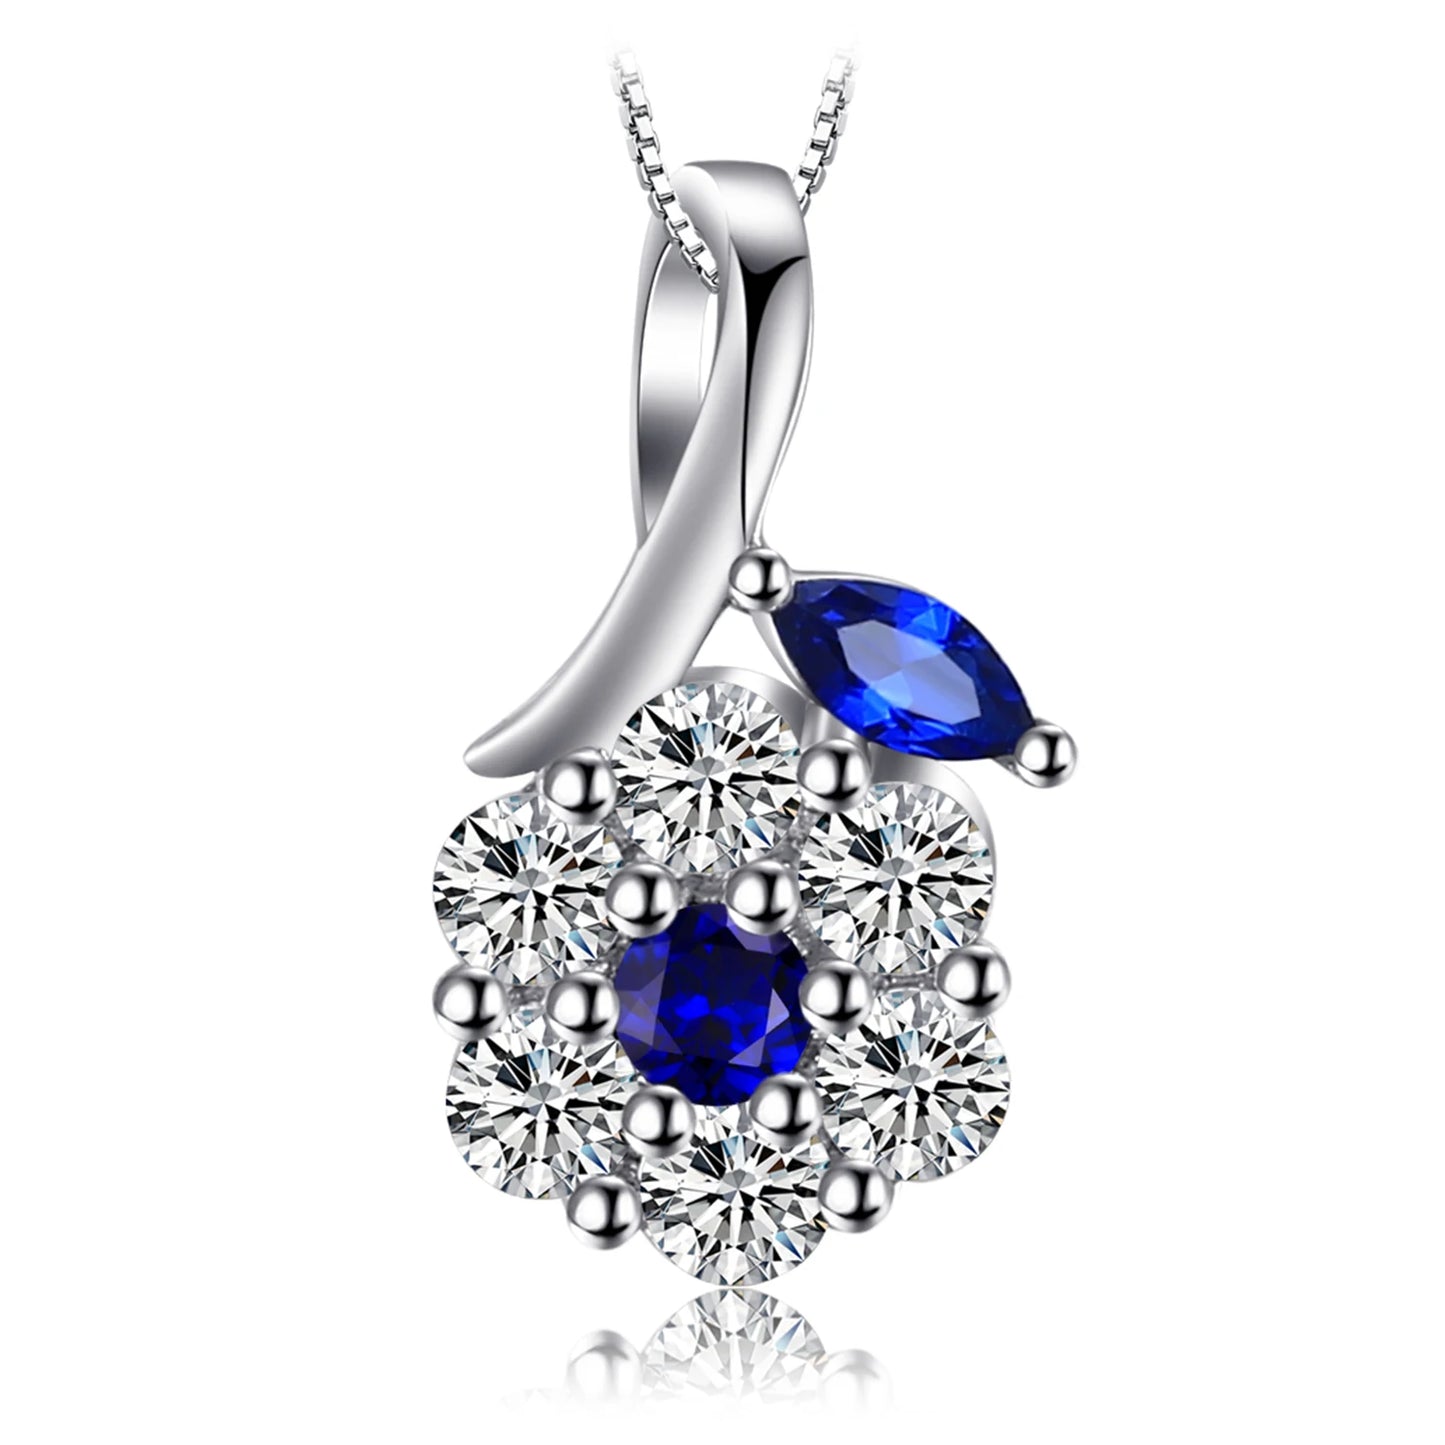 JewelryPalace Multiple Designs 925 Sterling Silver Colorful Gemstone Pendant Necklace for Women For Girl Fashion No Chain Created Spinel